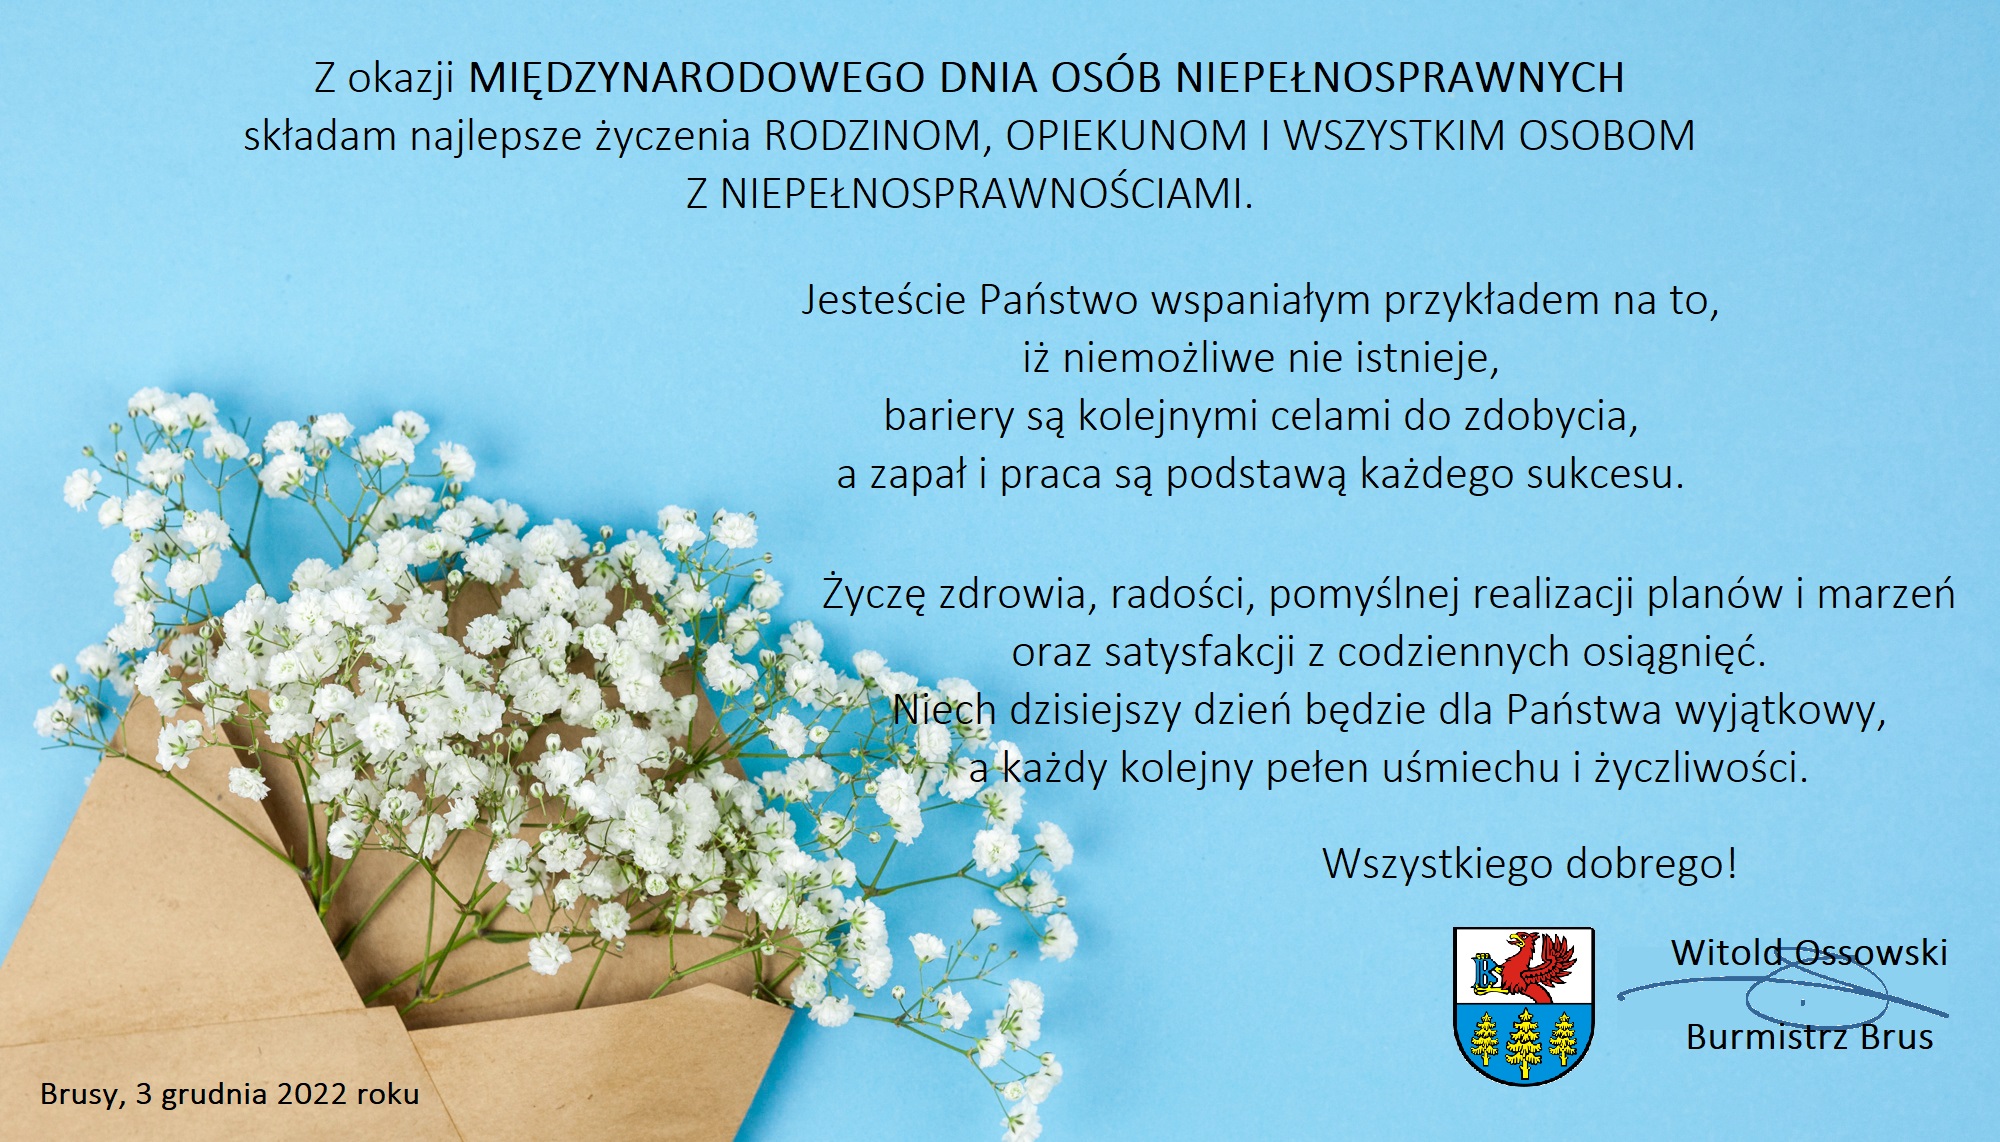 brown-envelop-with-small-white-gypsophila-flowers-arranged-on-corner-of-blue-backdrop.jpg